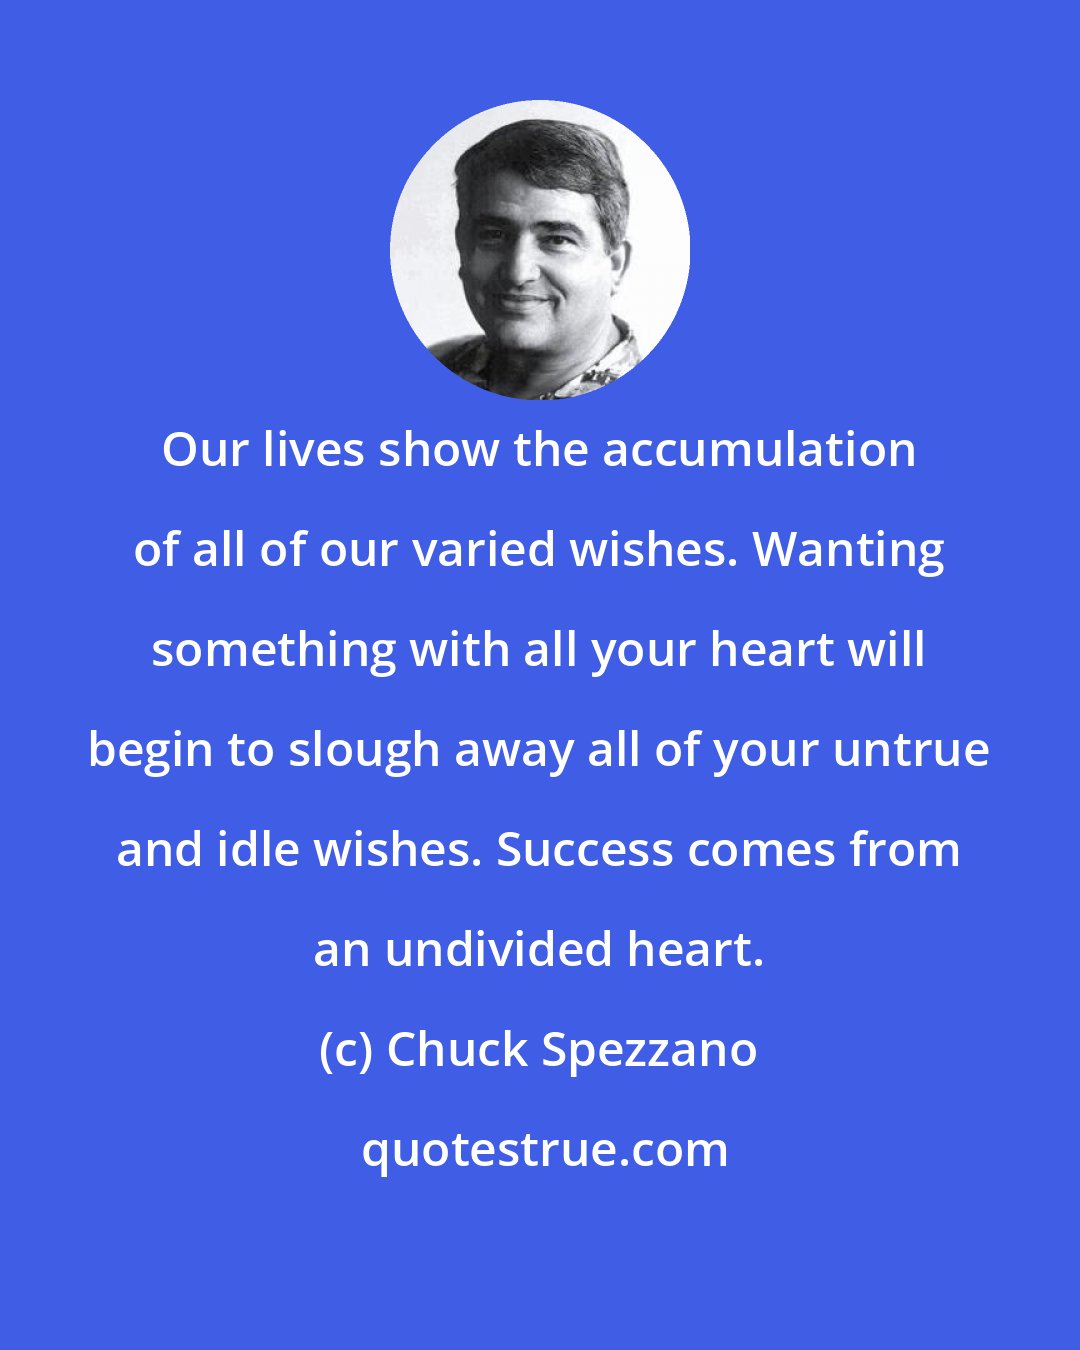 Chuck Spezzano: Our lives show the accumulation of all of our varied wishes. Wanting something with all your heart will begin to slough away all of your untrue and idle wishes. Success comes from an undivided heart.